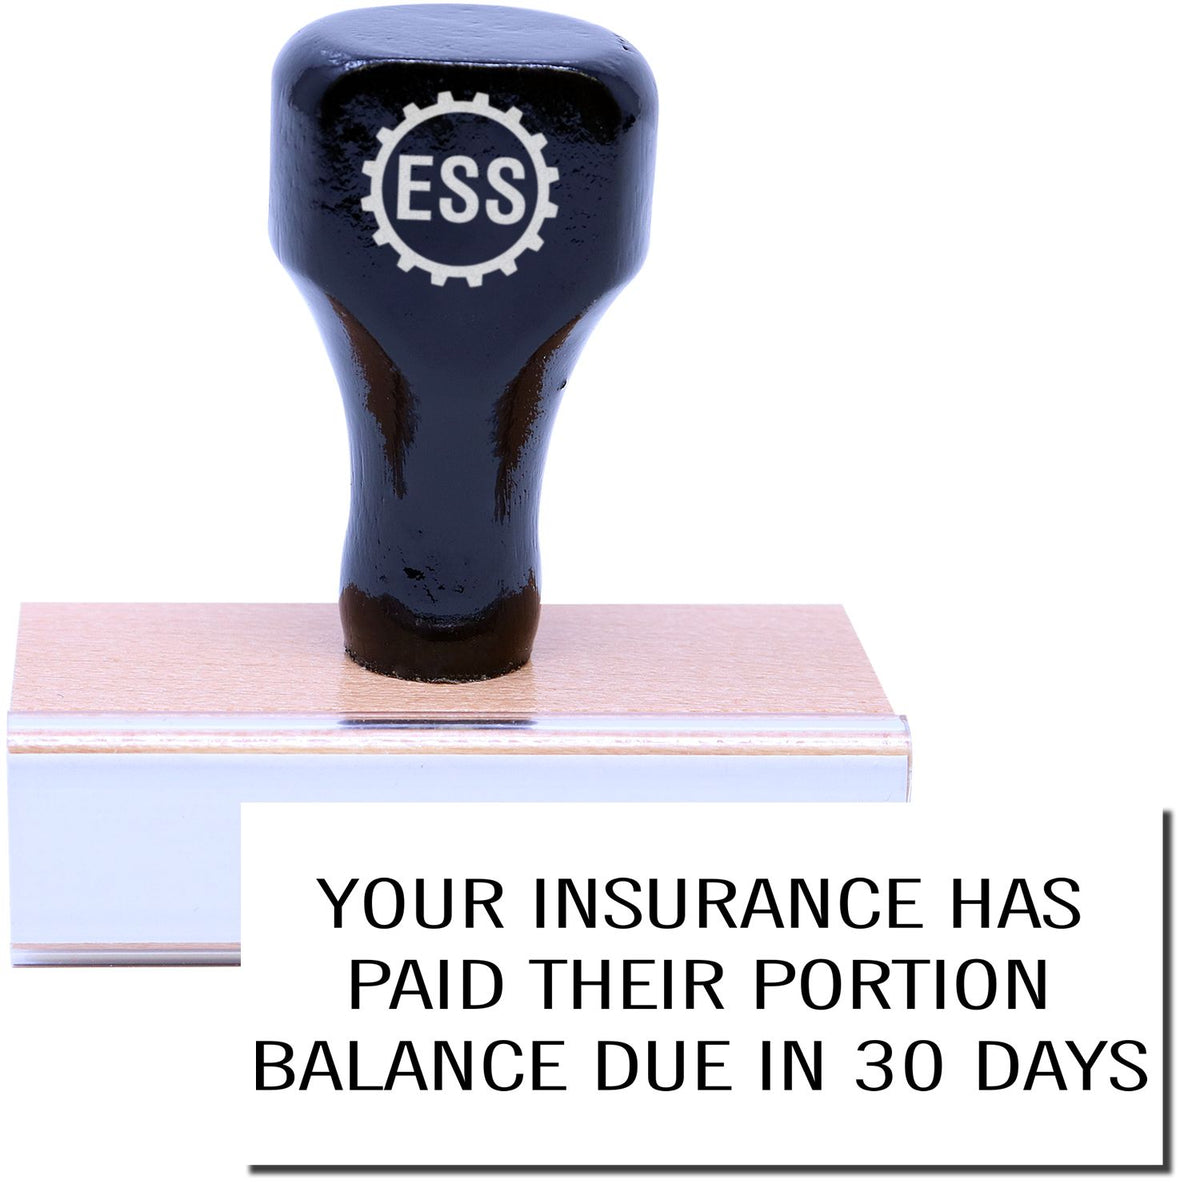 A stock office rubber stamp with a stamped image showing how the text &quot;YOUR INSURANCE HAS PAID THEIR PORTION BALANCE IS DUE IN 30 DAYS&quot; is displayed after stamping.